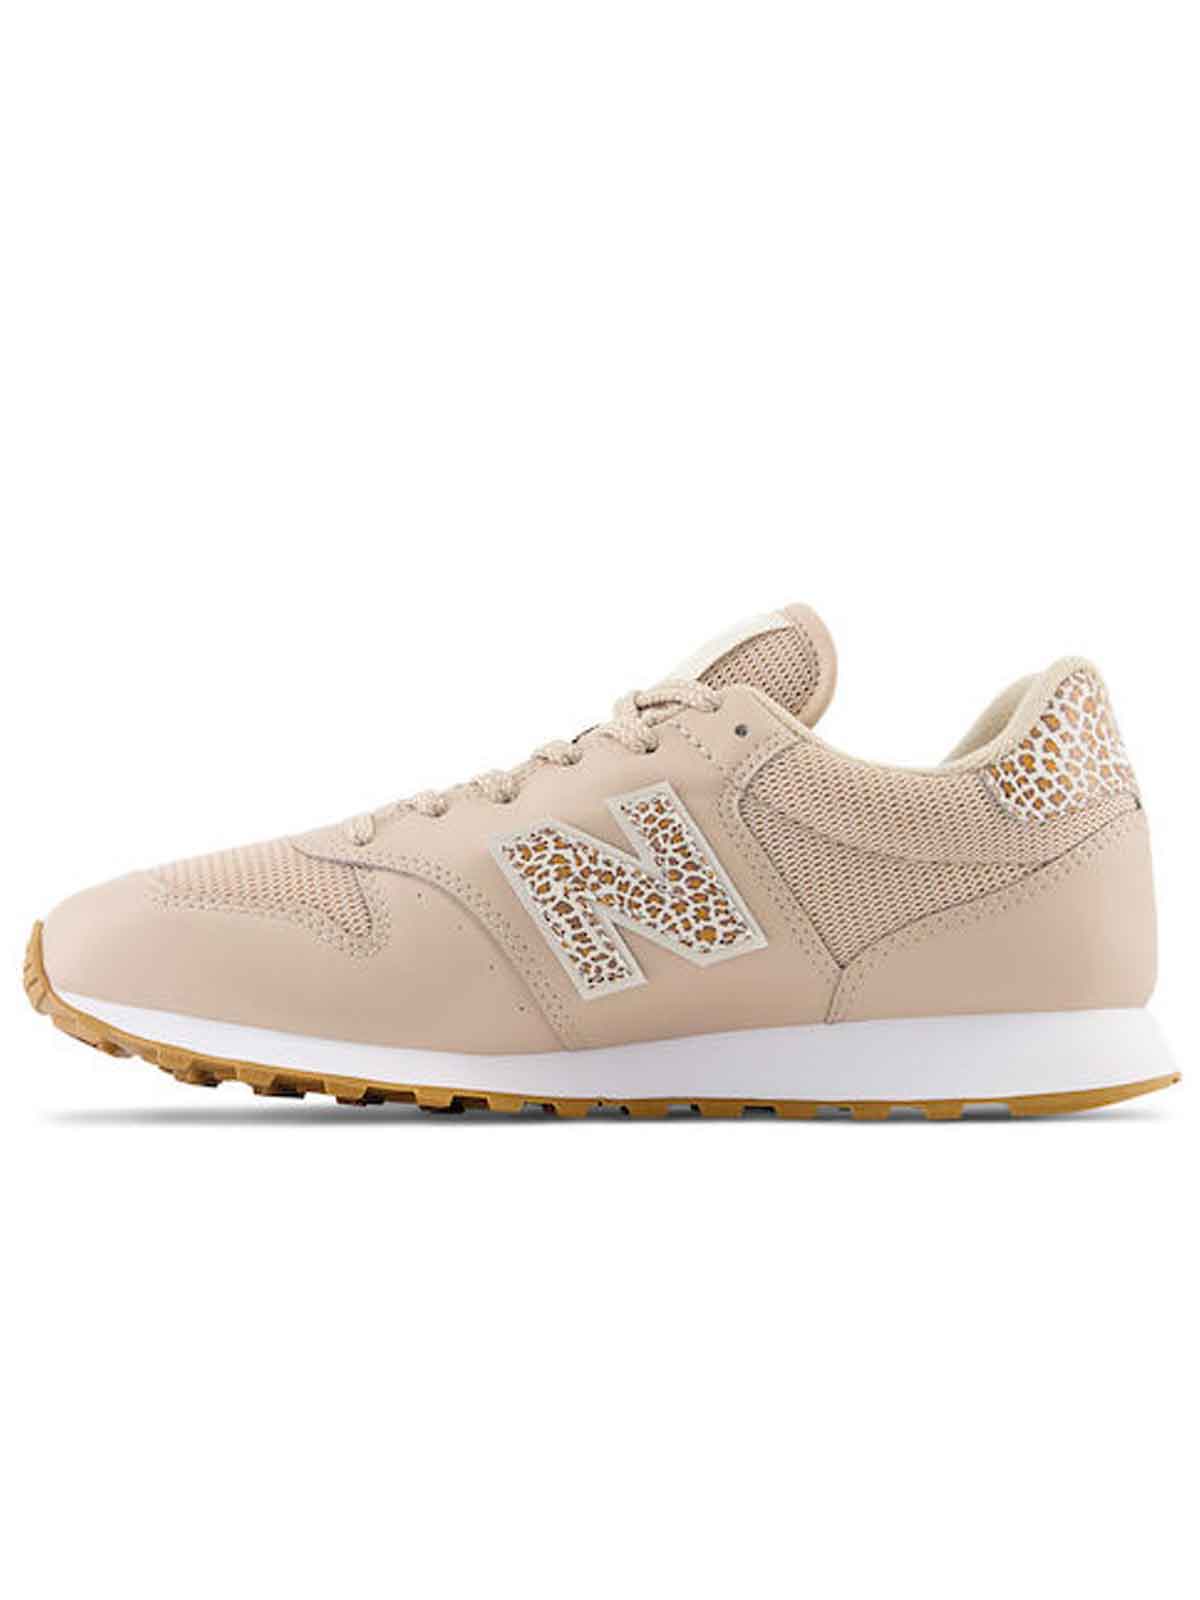   New Balance | 500 Lifestyle Sneakers |  